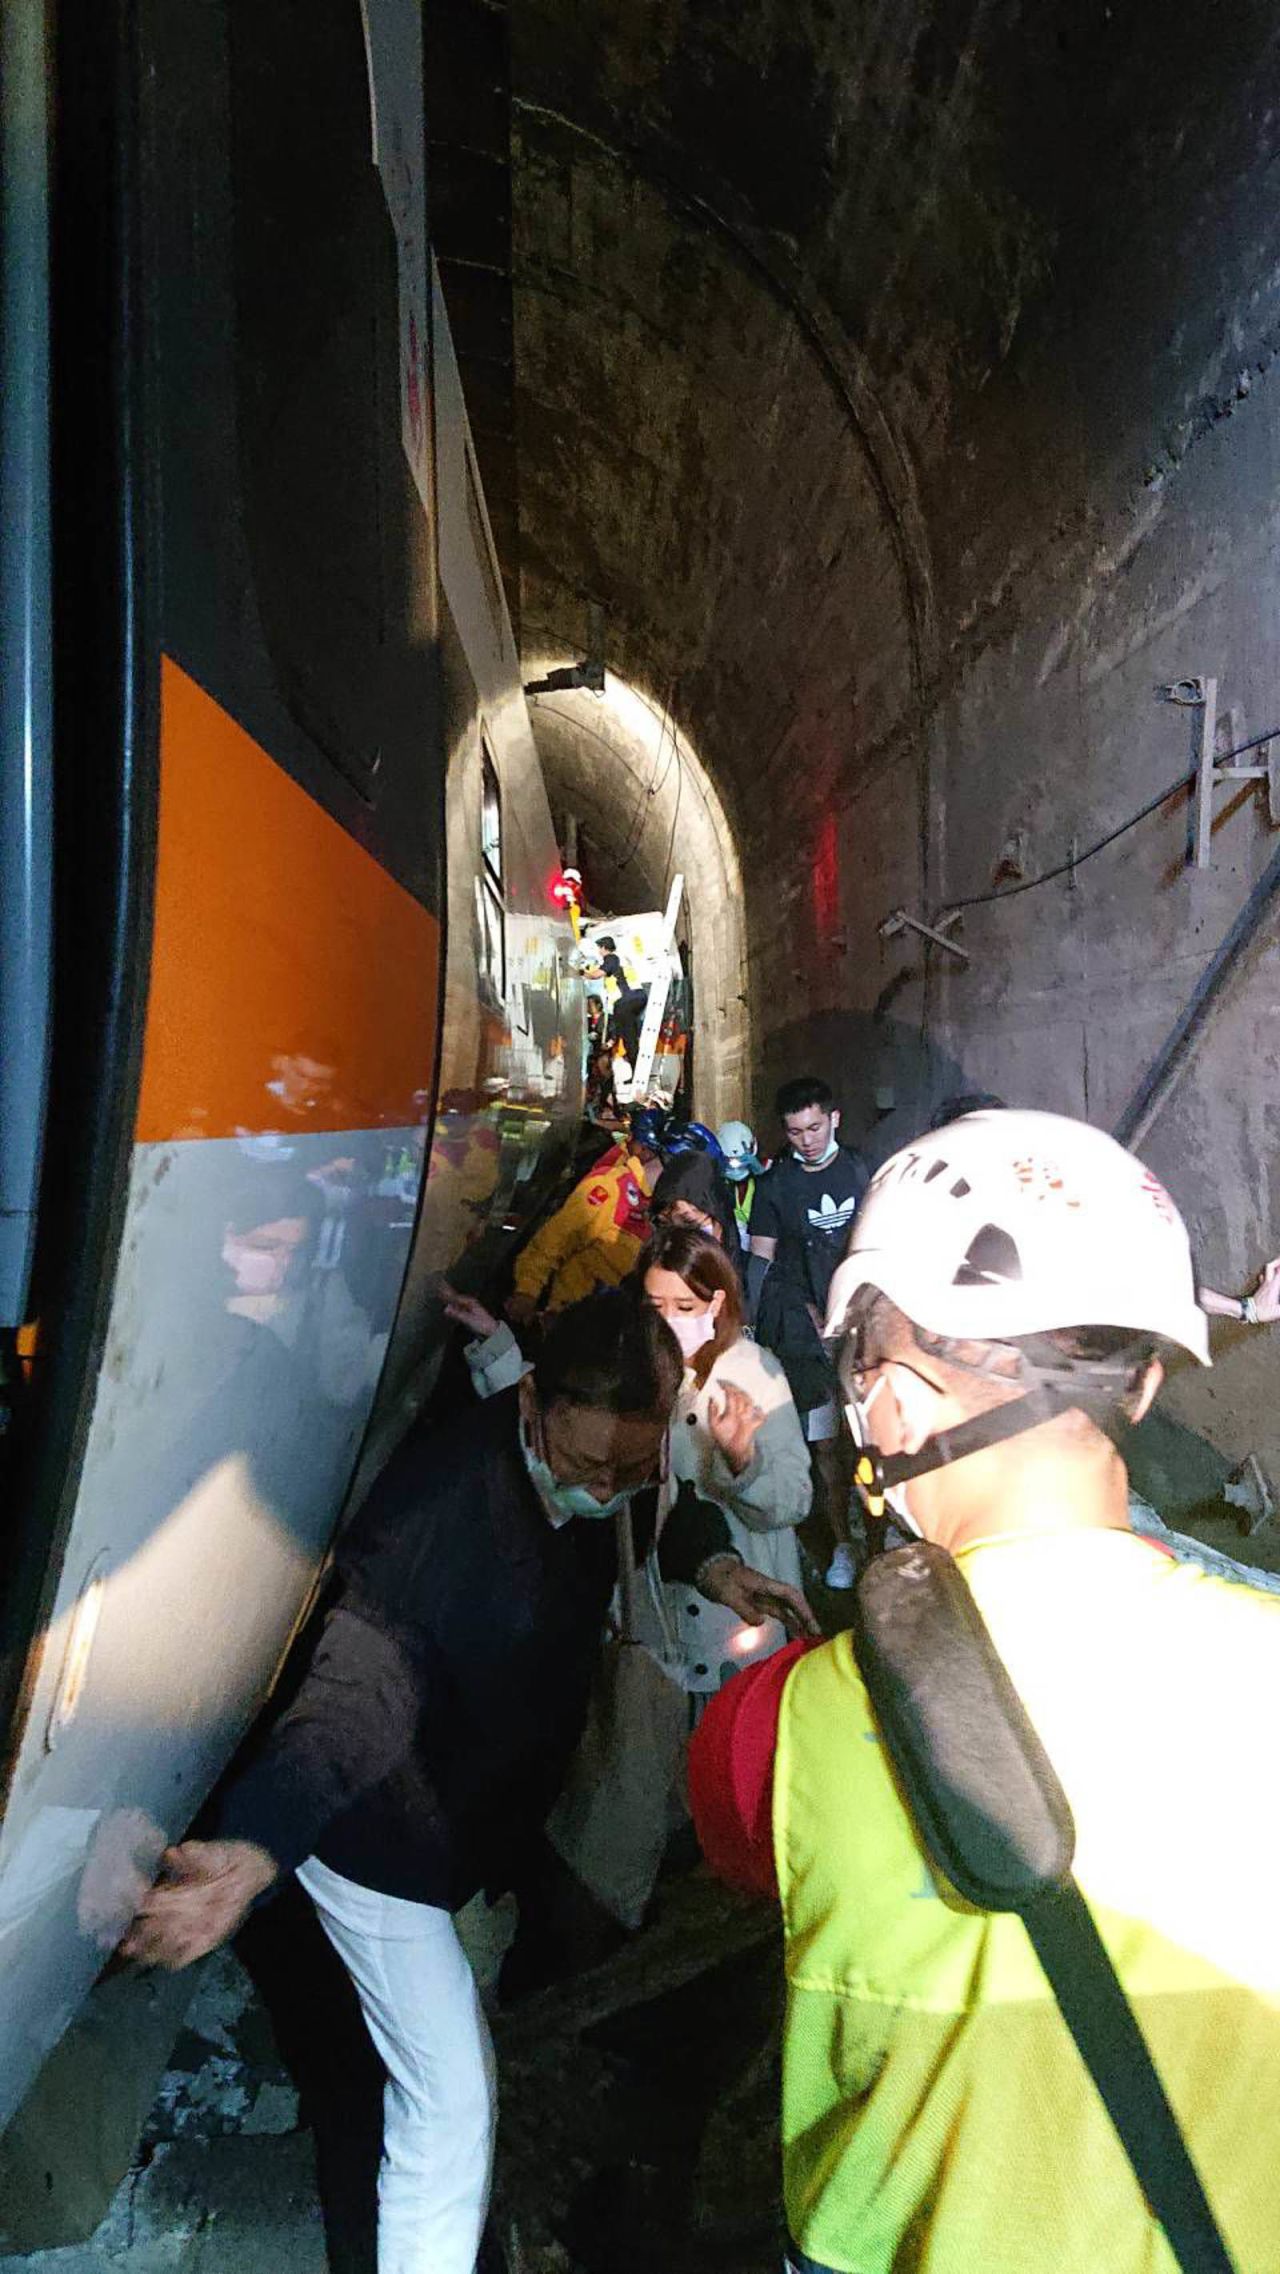 Passengers are seen making their way through the tunnel alongside rescue workers.